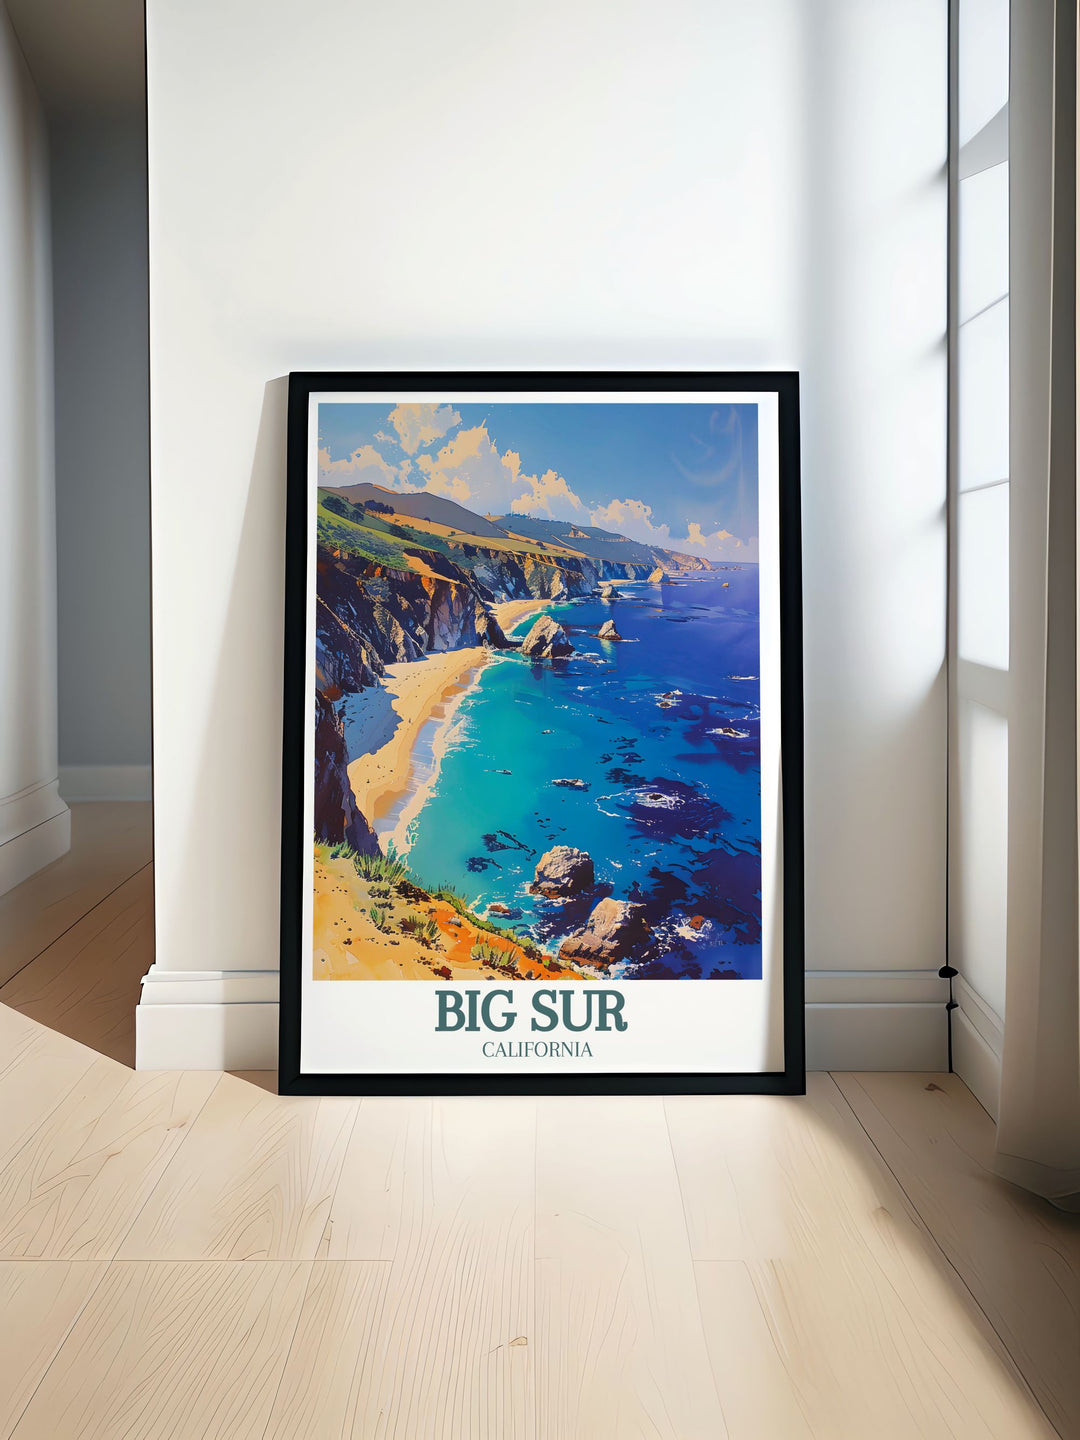 Featuring the lush landscapes and stunning ocean views of Big Sur, this travel poster captures the natural beauty of California, ideal for those who appreciate scenic coastal landscapes.